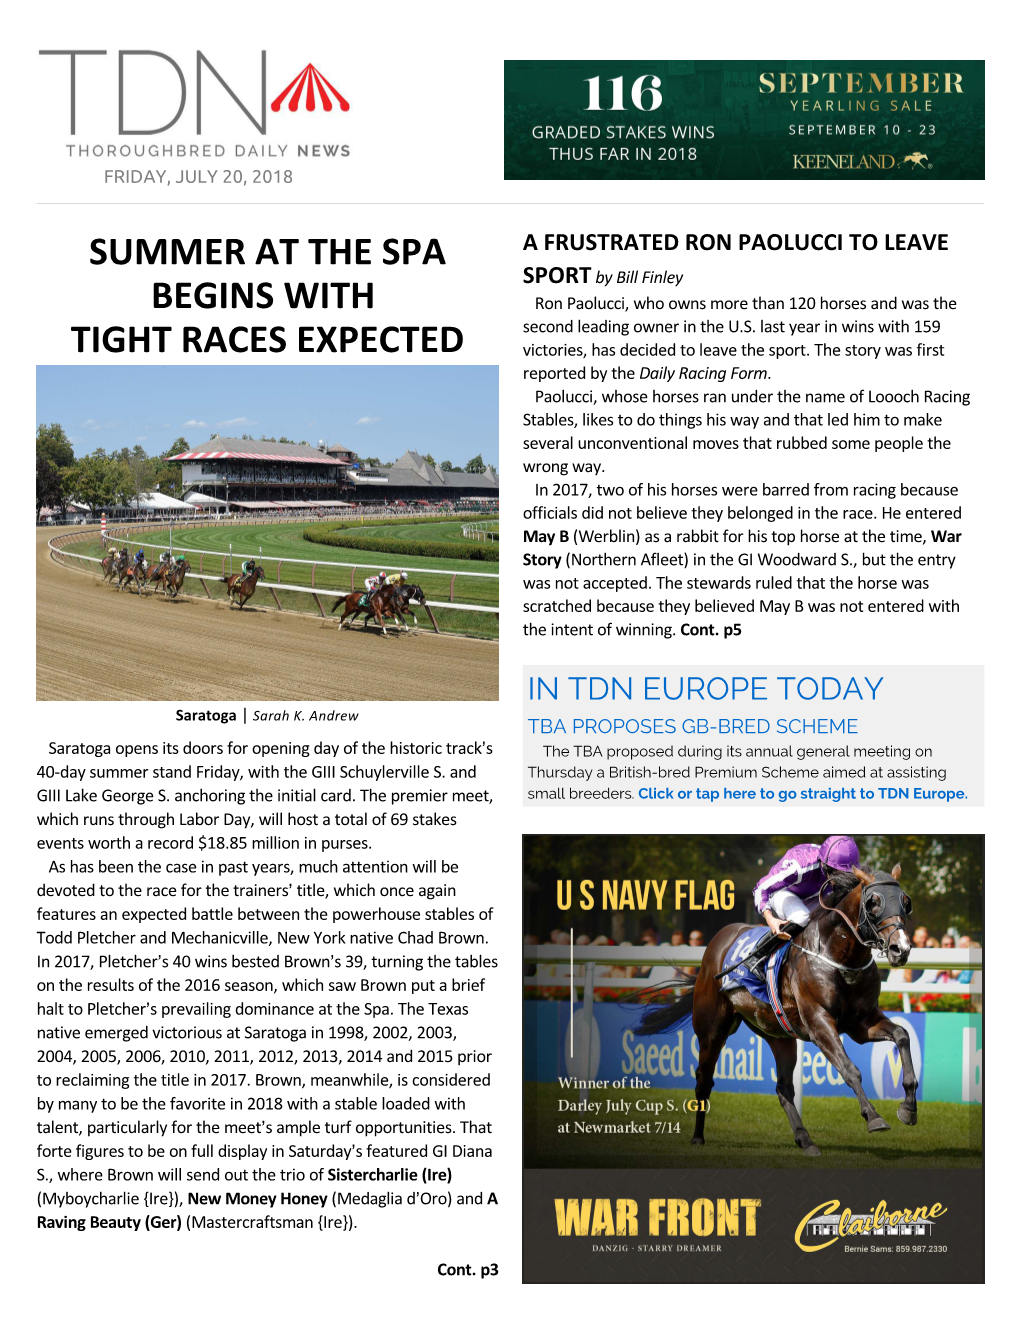 Summer at the Spa Begins with Tight Races Expected